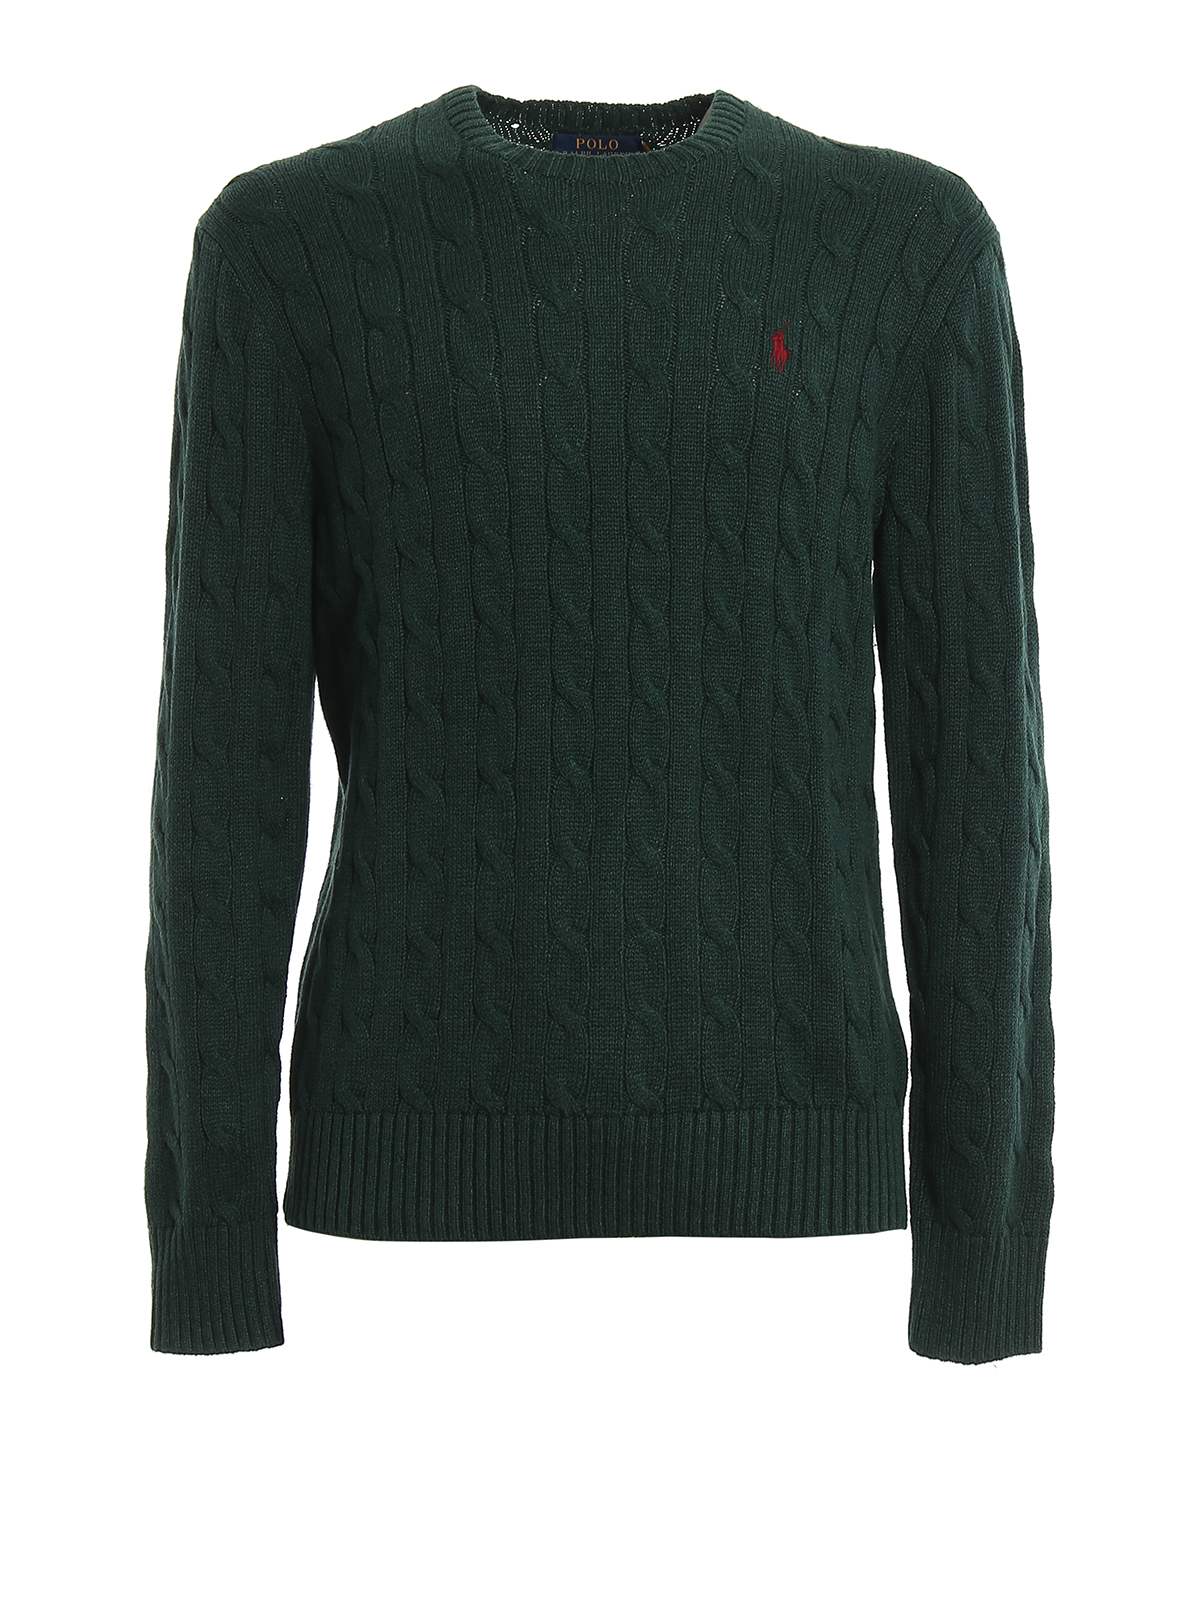 POLO RALPH LAUREN GREEN CABLE KNIT COTTON SWEATER